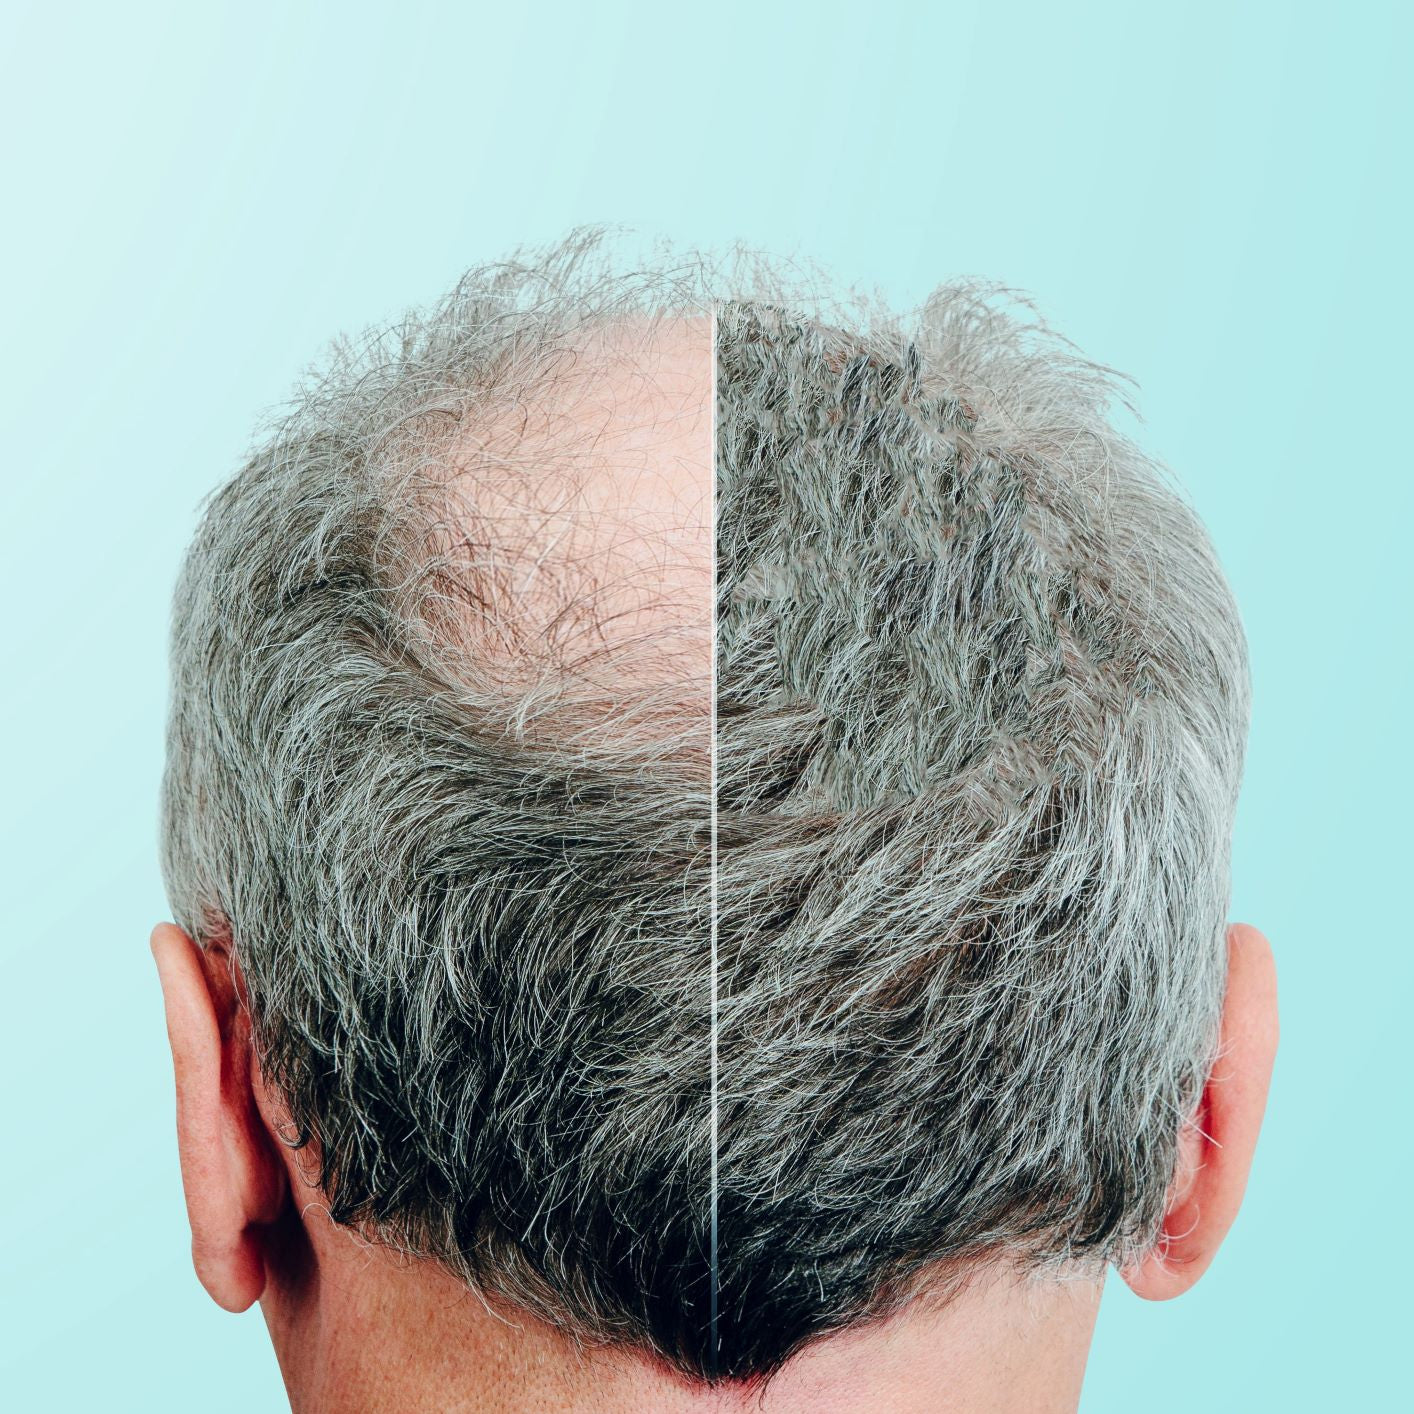 Topical Finasteride for Hair Loss  Dr Michele Green MD